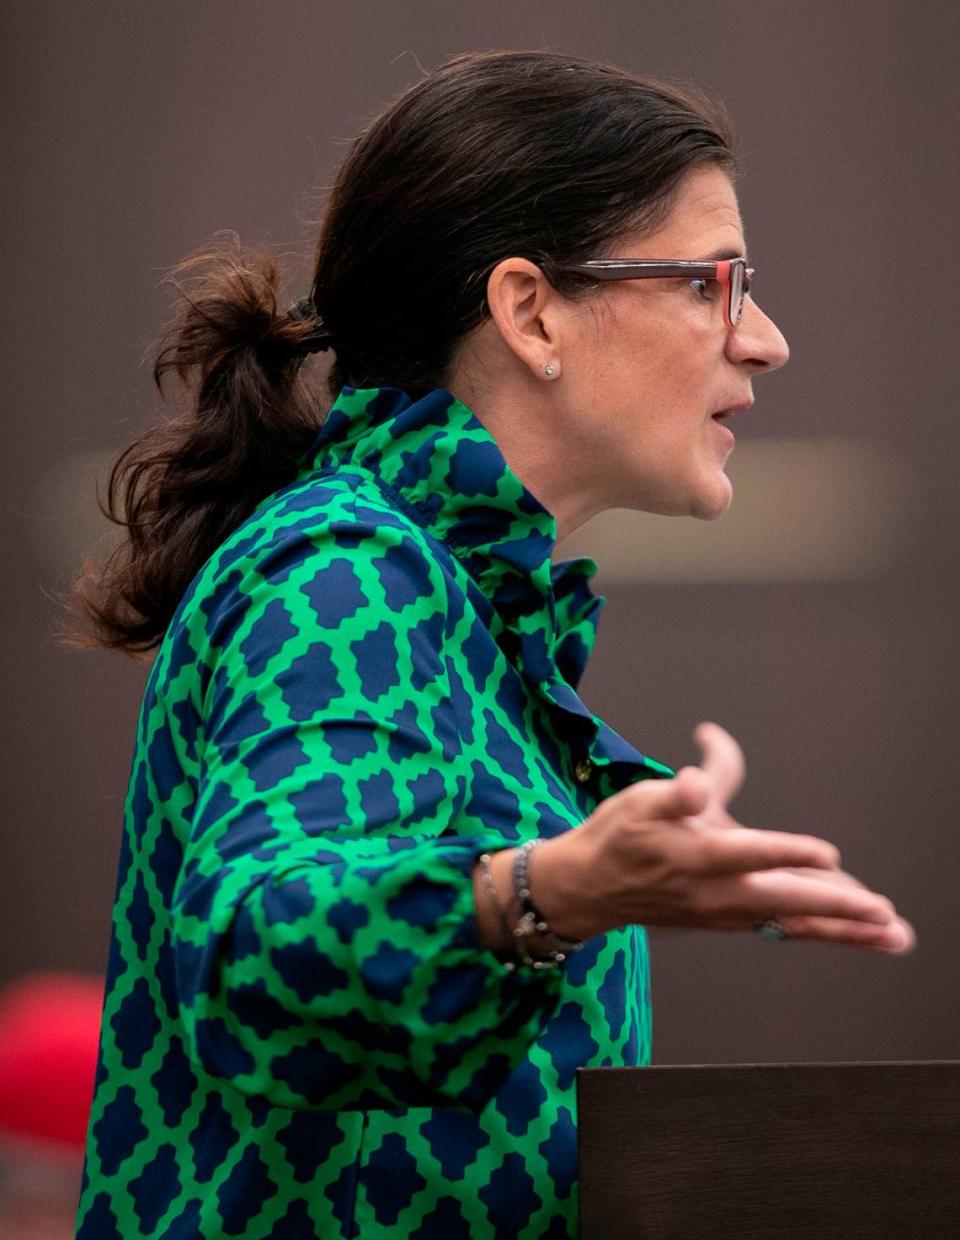 Jennifer Olson speaks in opposition of HB 358 before the Judiciary 1 House Standing Committee on Wednesday, April 14, 2021 at the Legislative Office Building on Raleigh, N.C.